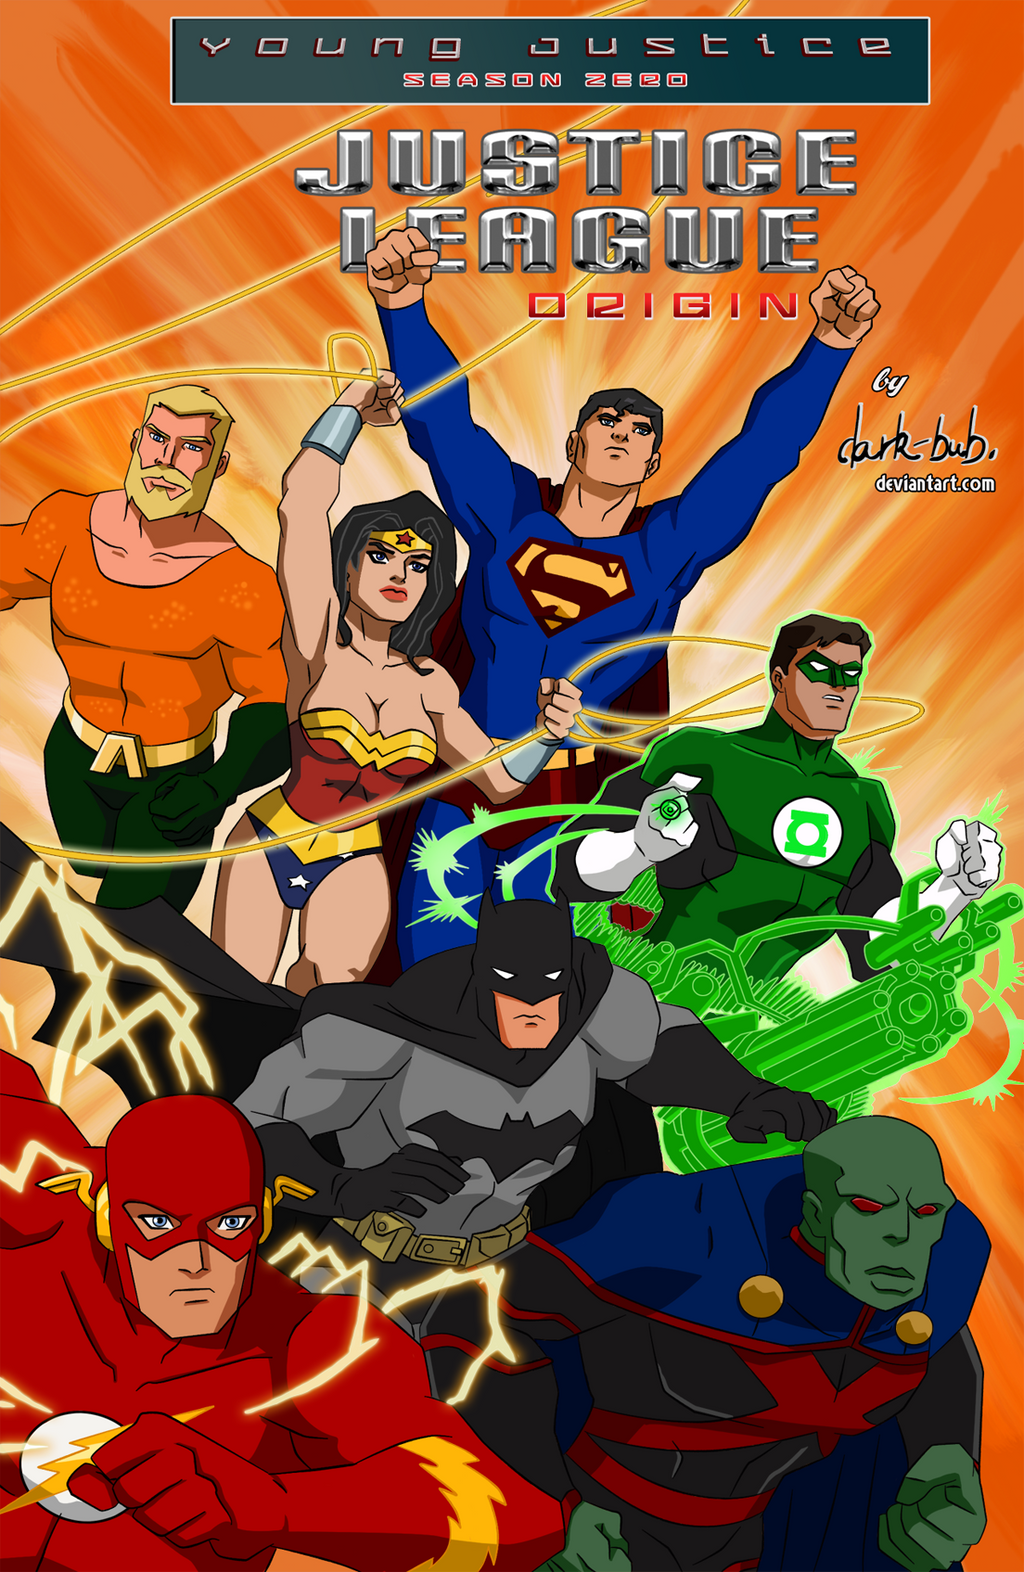 Young Justice Art by dark-bub